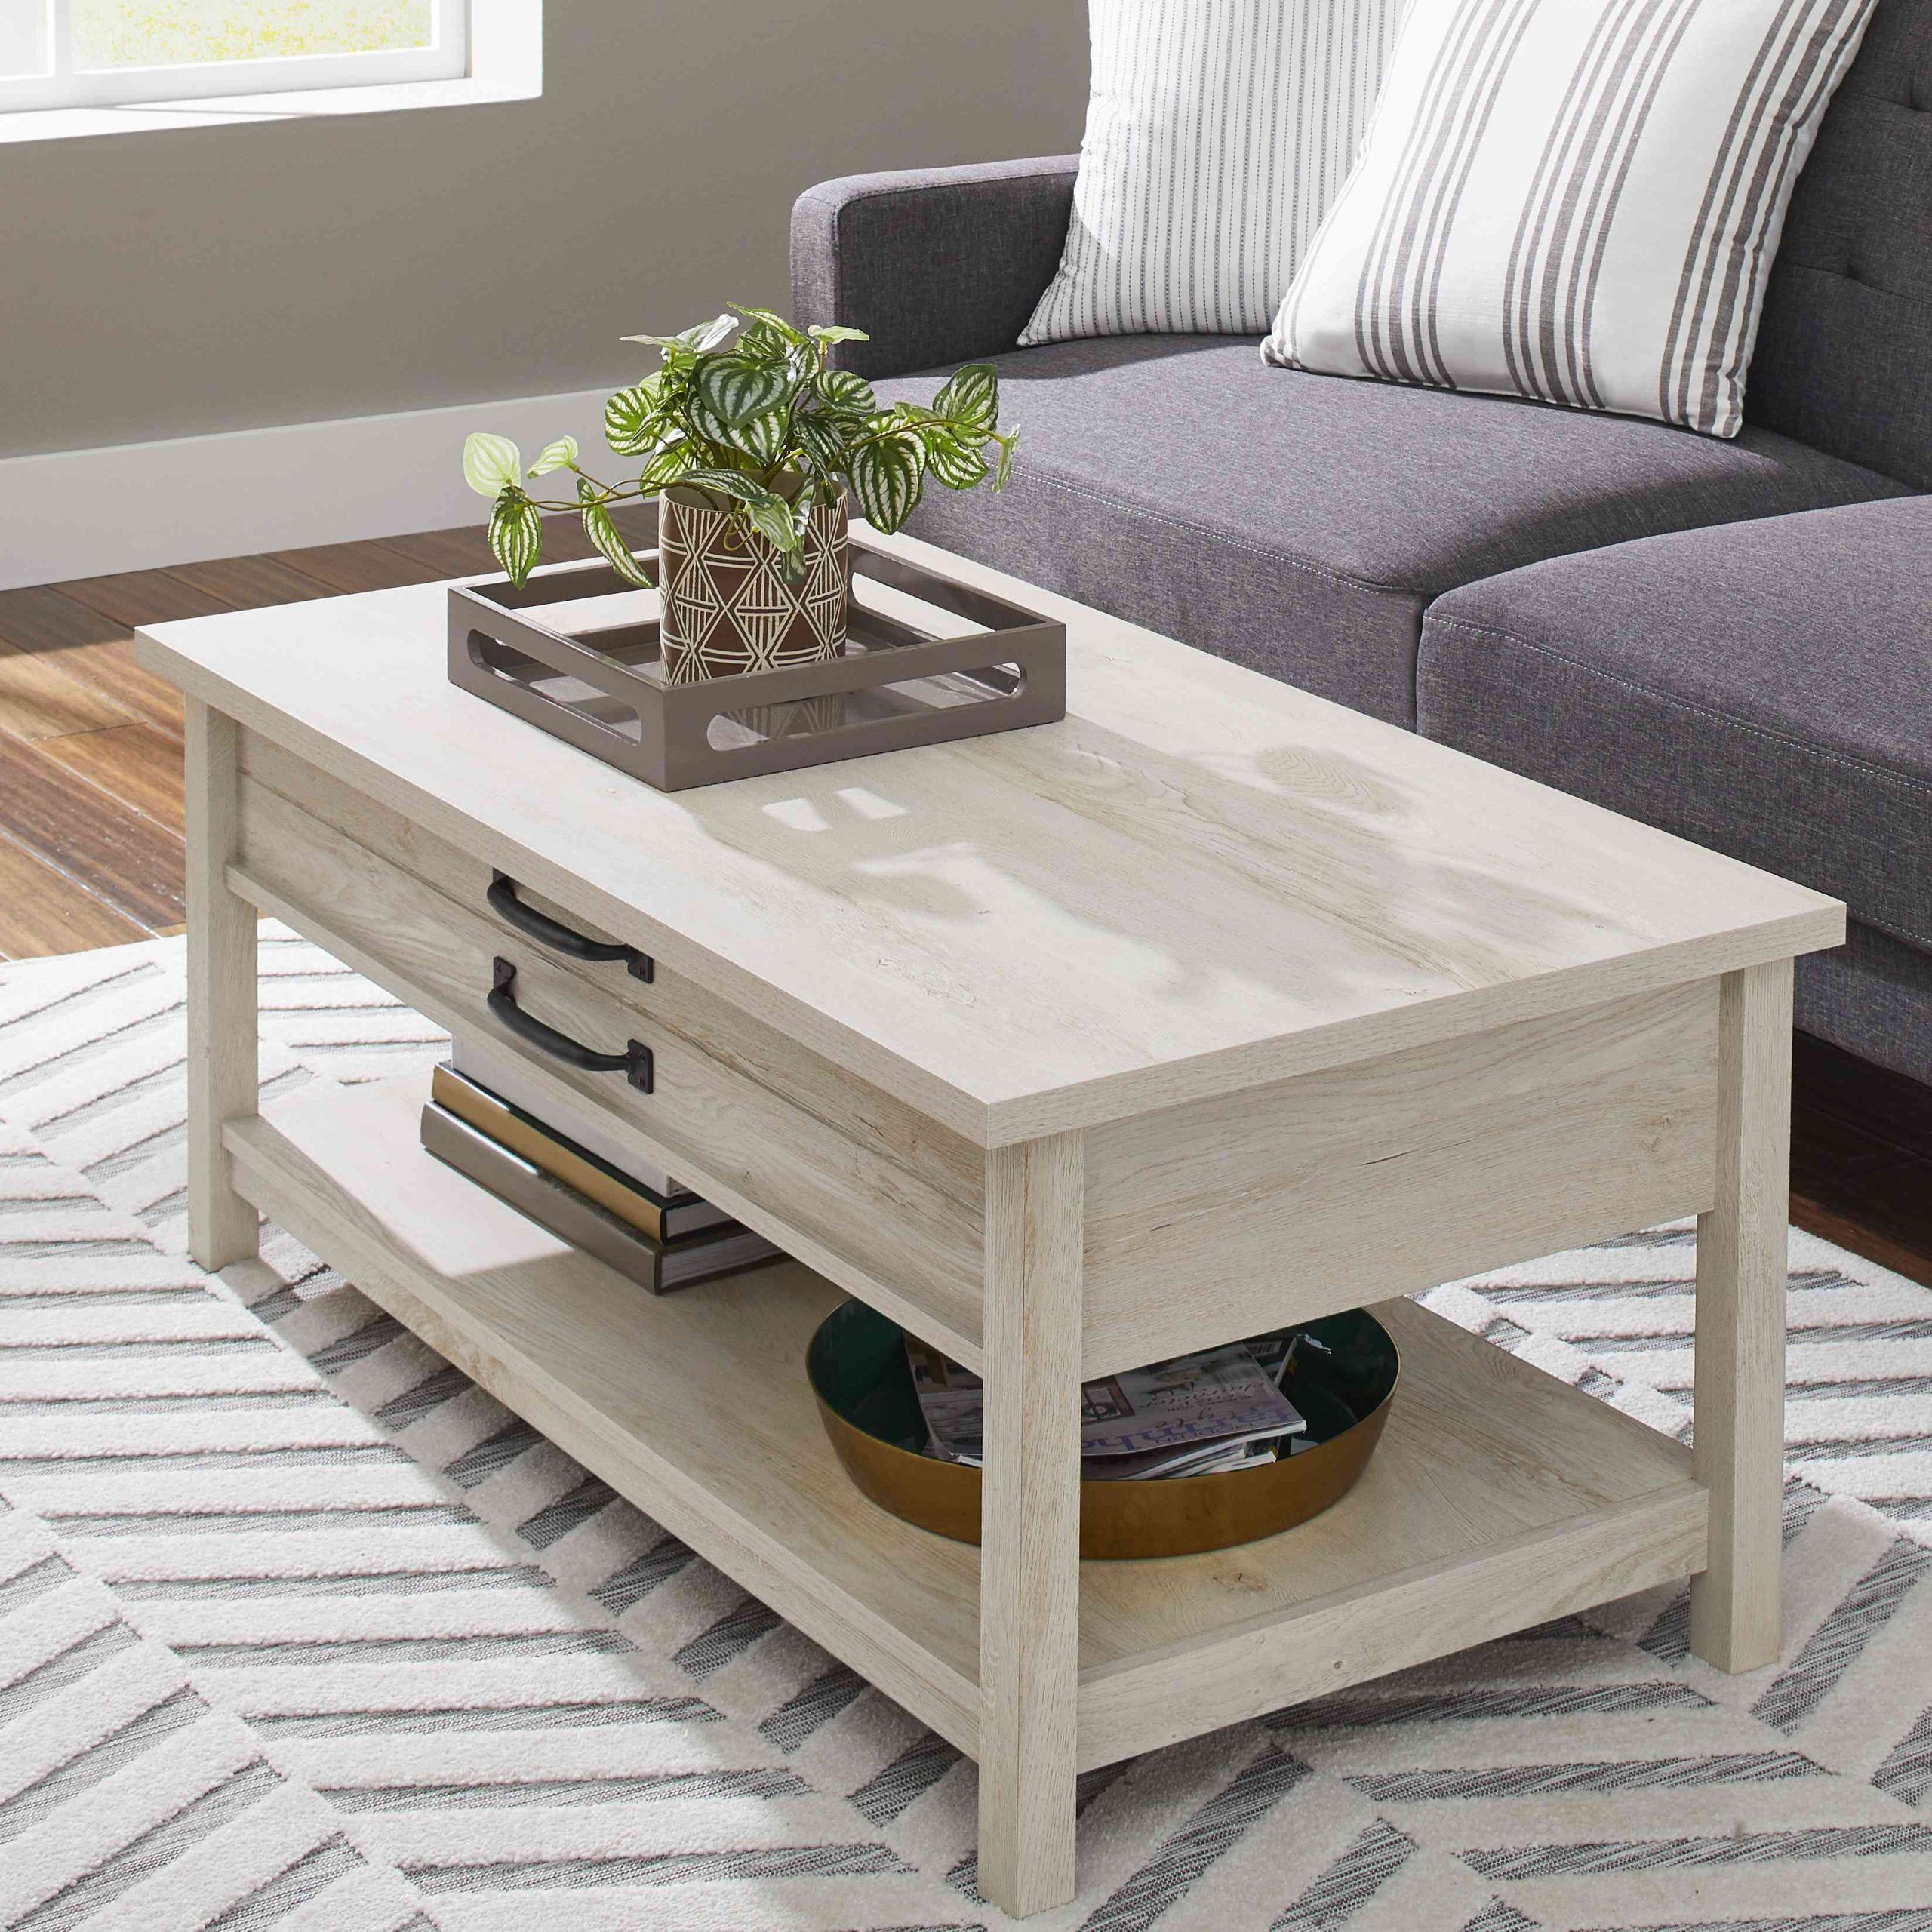 The 9 Best Lift Top Coffee Tables Of 2022 Within Lift Top Coffee Tables With Shelves (View 5 of 20)